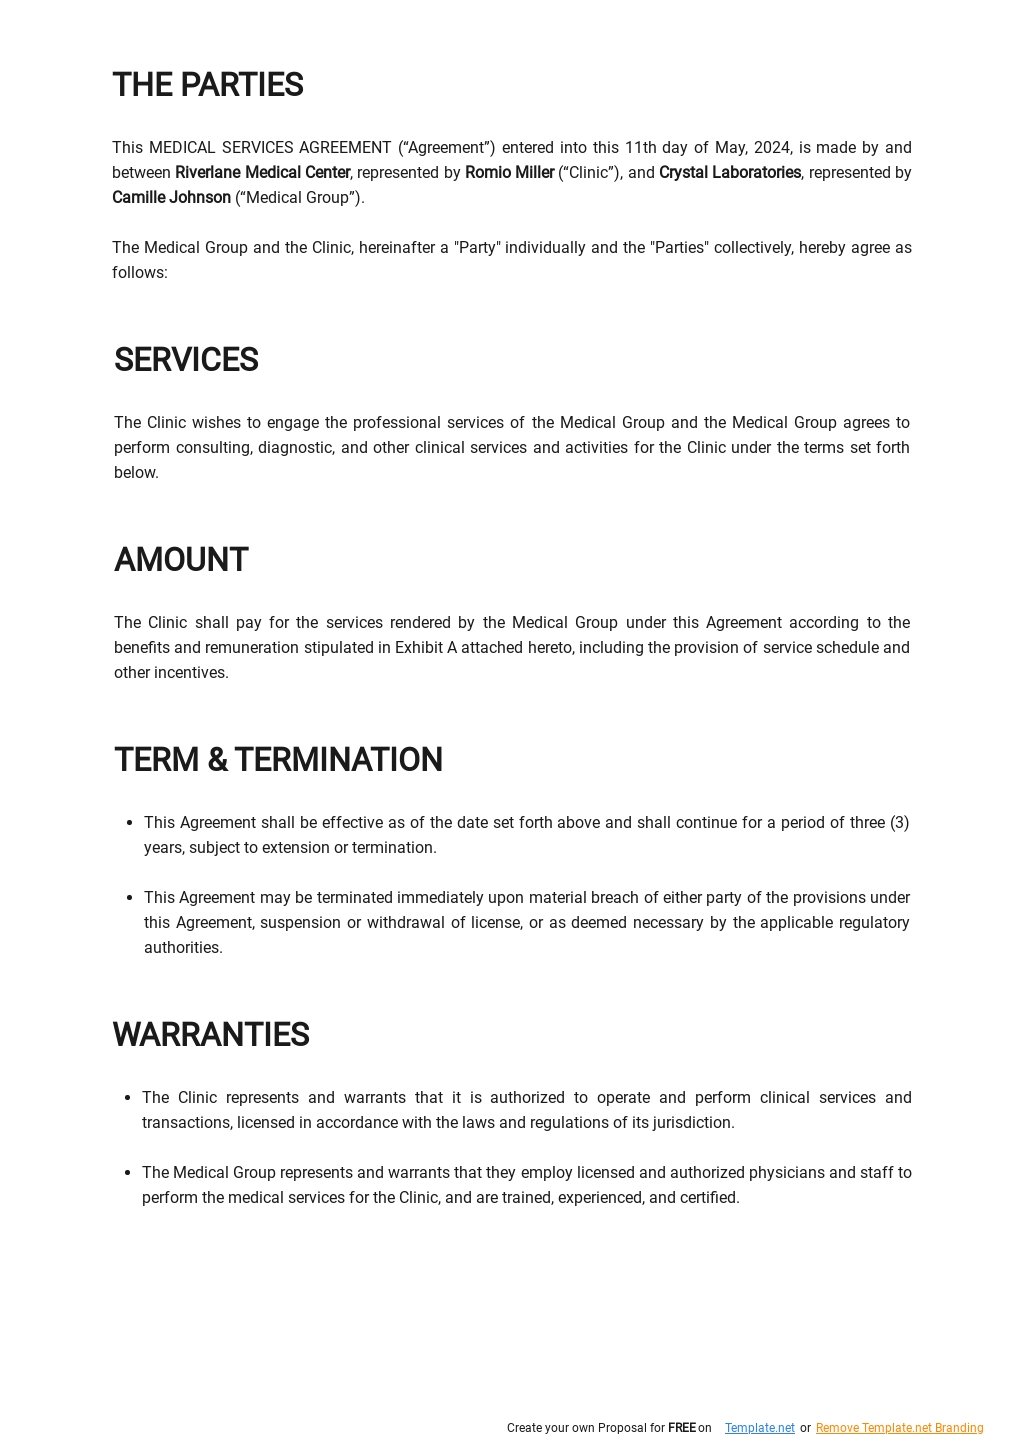 Medical Services Agreement Template in Google Docs, Word